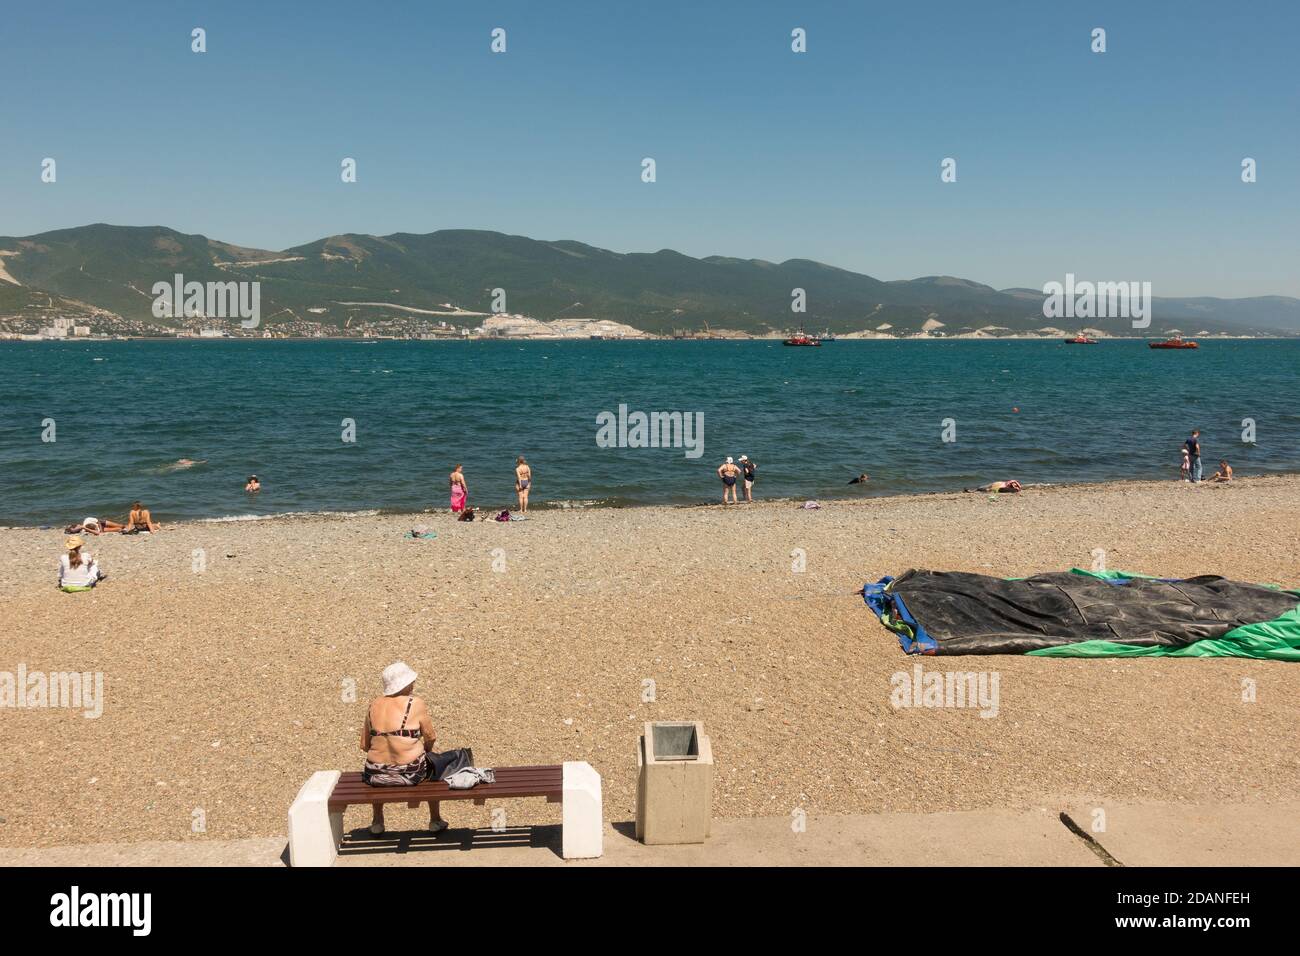 Russia, Novorossiysk, July 11, 2020: Central beach of the black sea city. Citizens and guests relax on a Sunny summer day Stock Photo